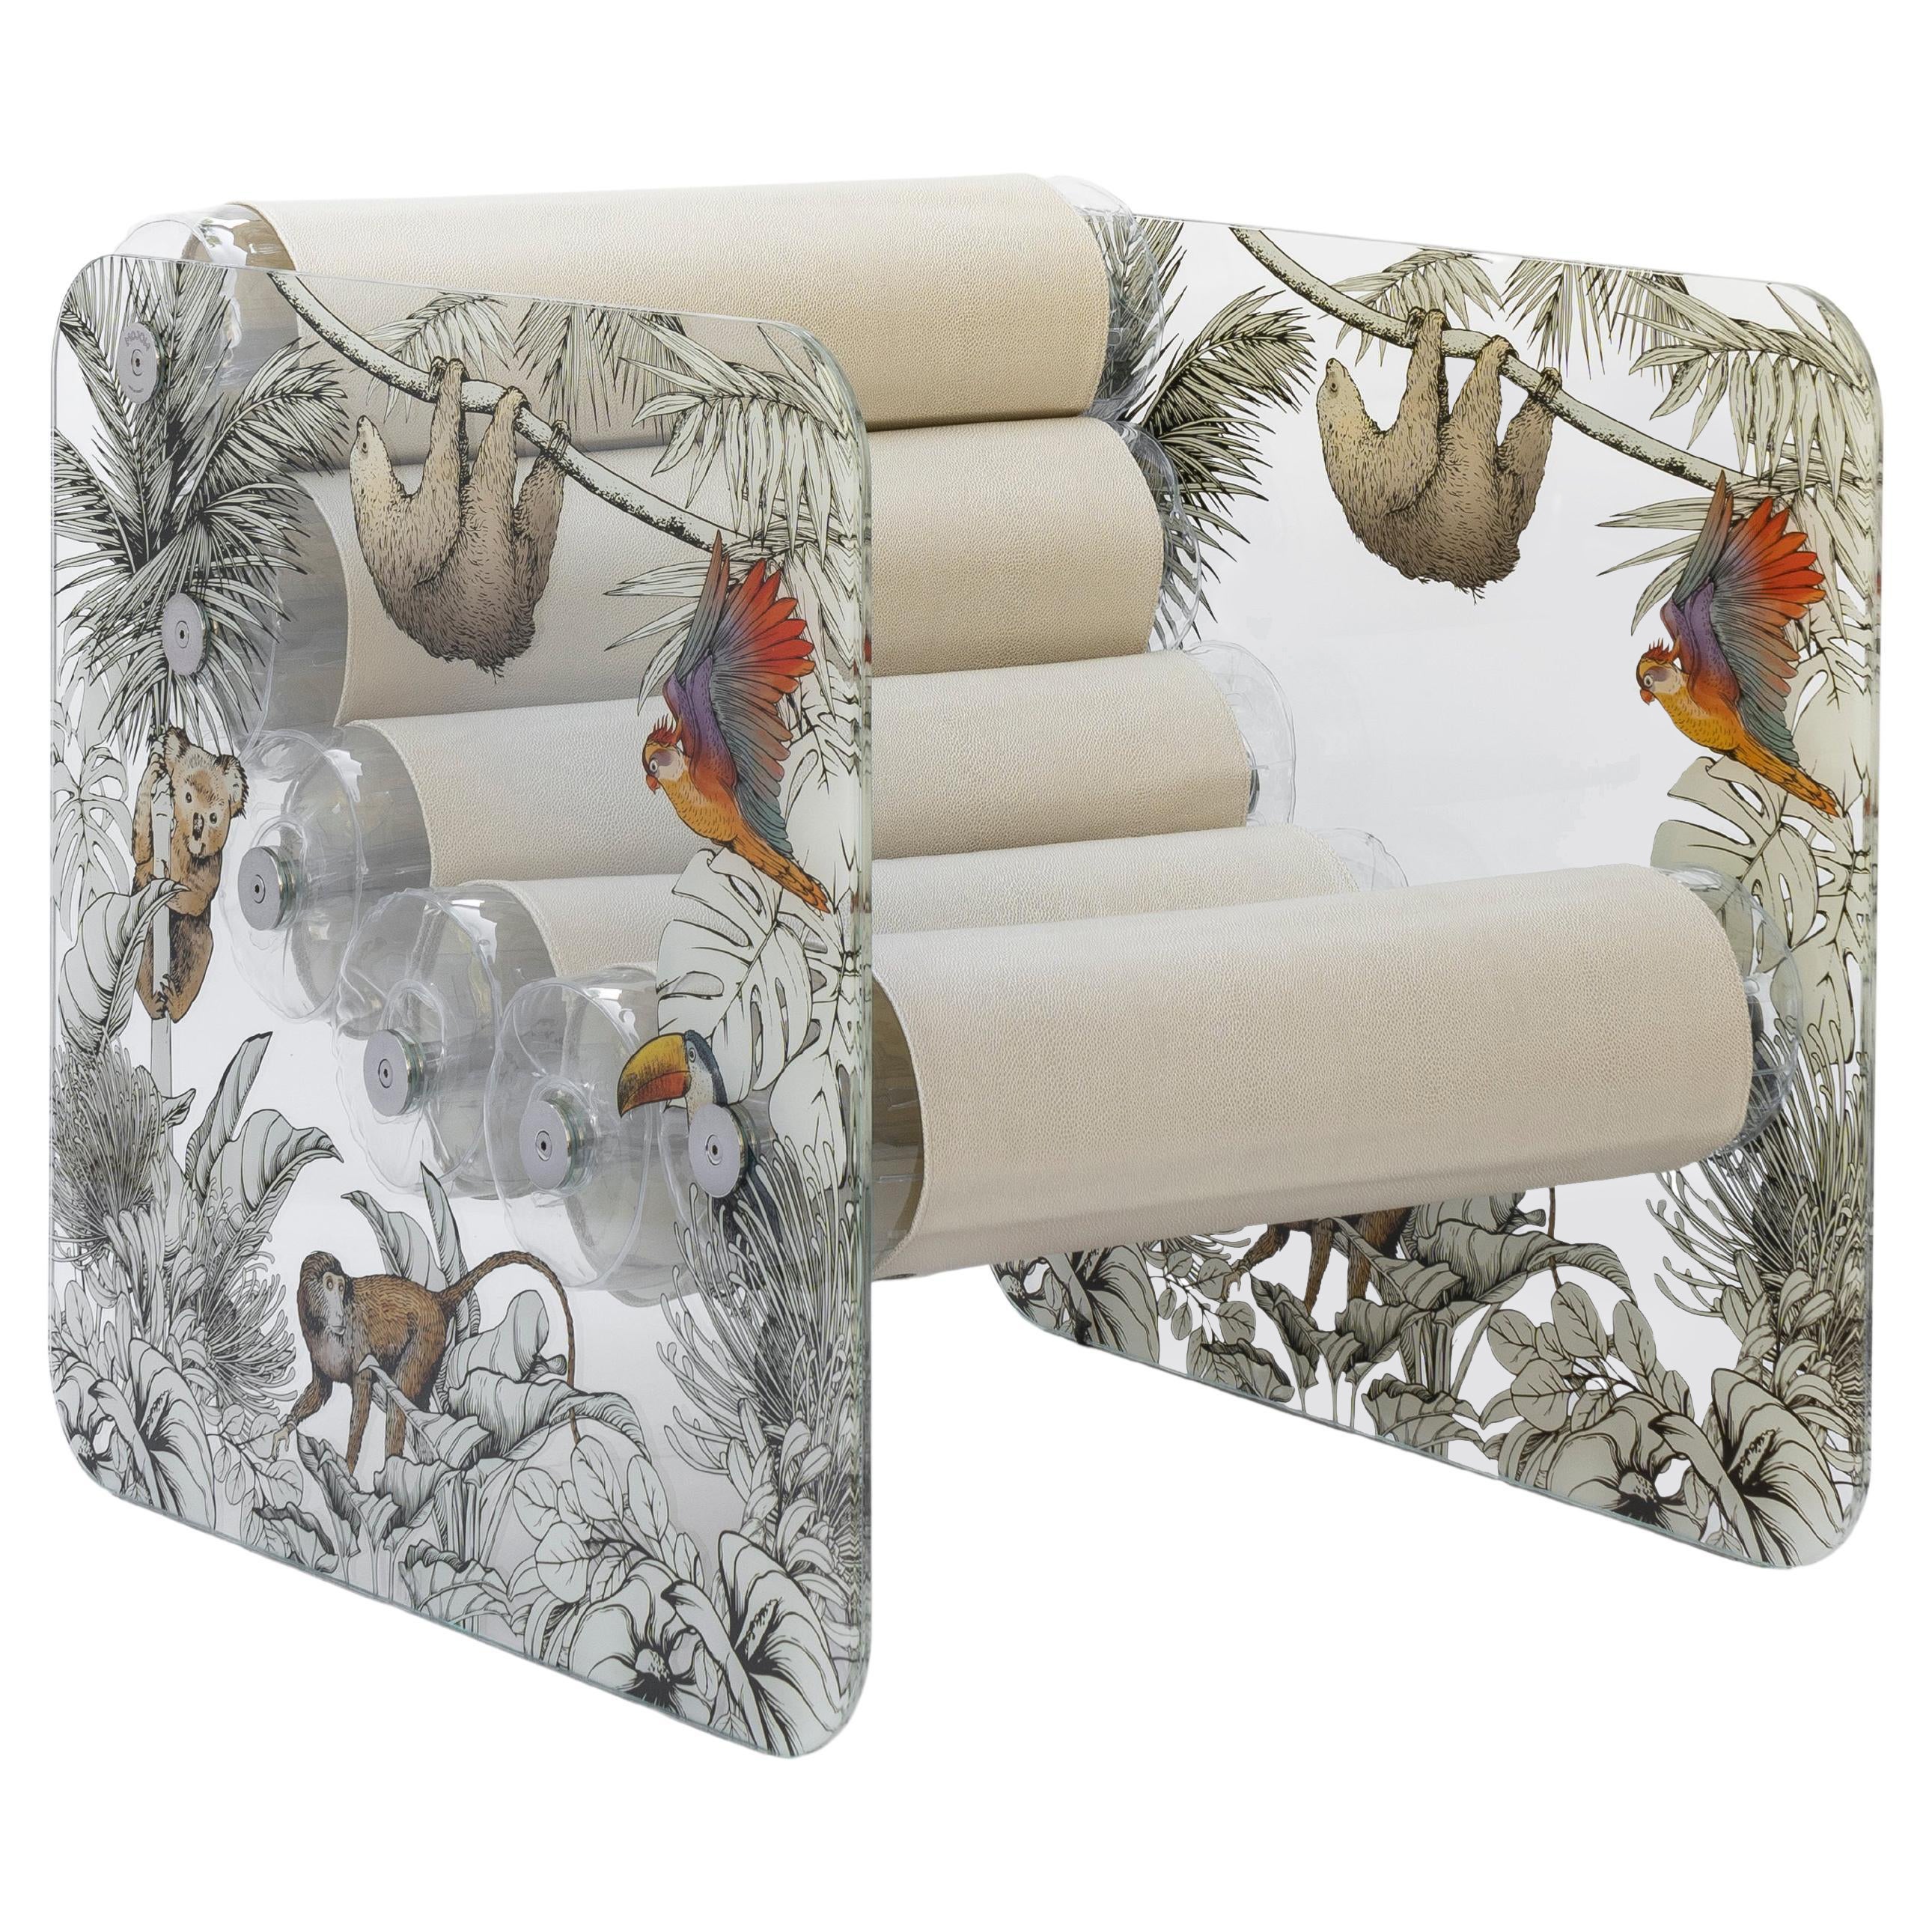 Design armchair Mw02 "Jungle", handmade in France, designed by Olivier Santini For Sale